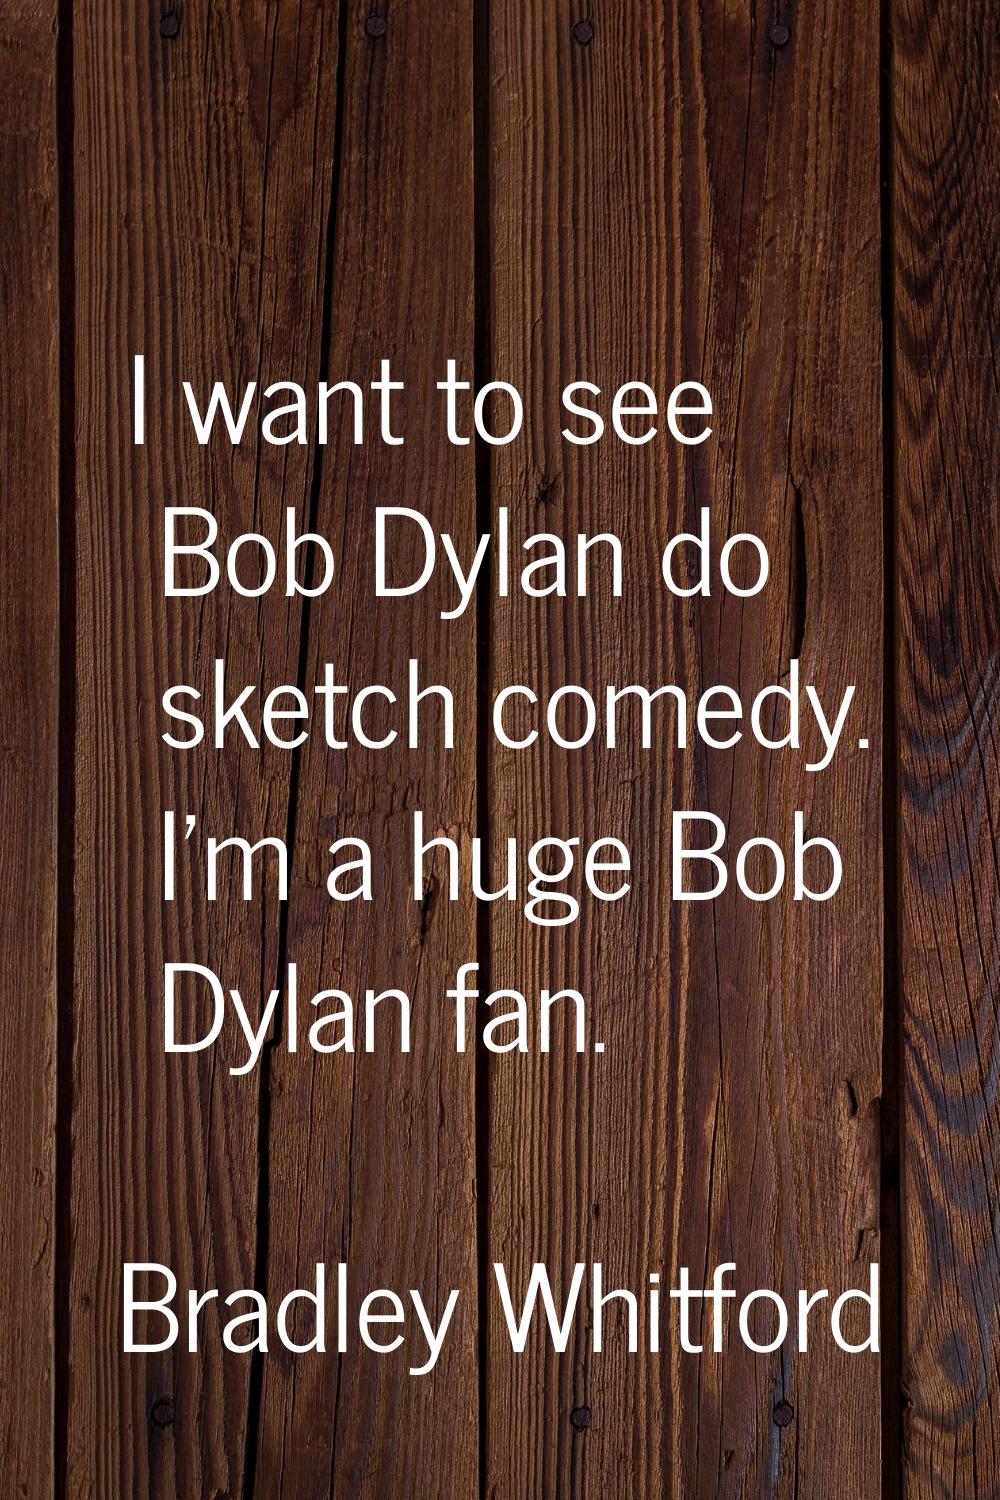 I want to see Bob Dylan do sketch comedy. I'm a huge Bob Dylan fan.